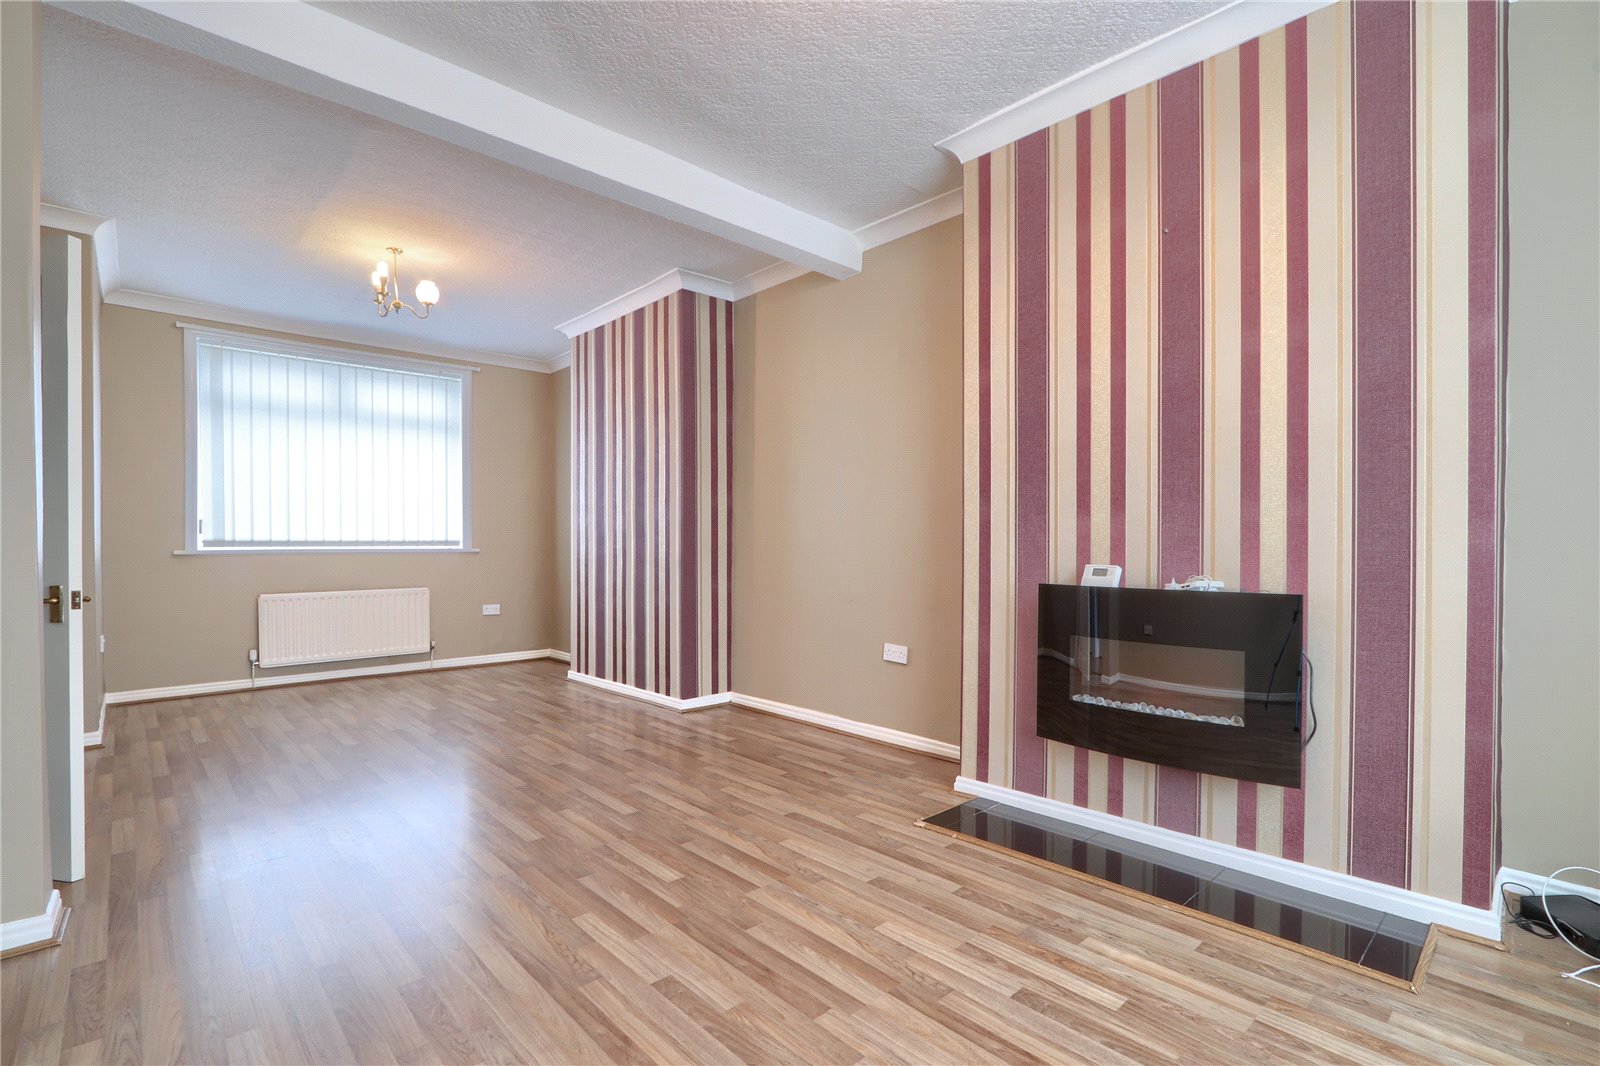 3 bed house for sale in Richardson Road, Stockton-on-Tees  - Property Image 4